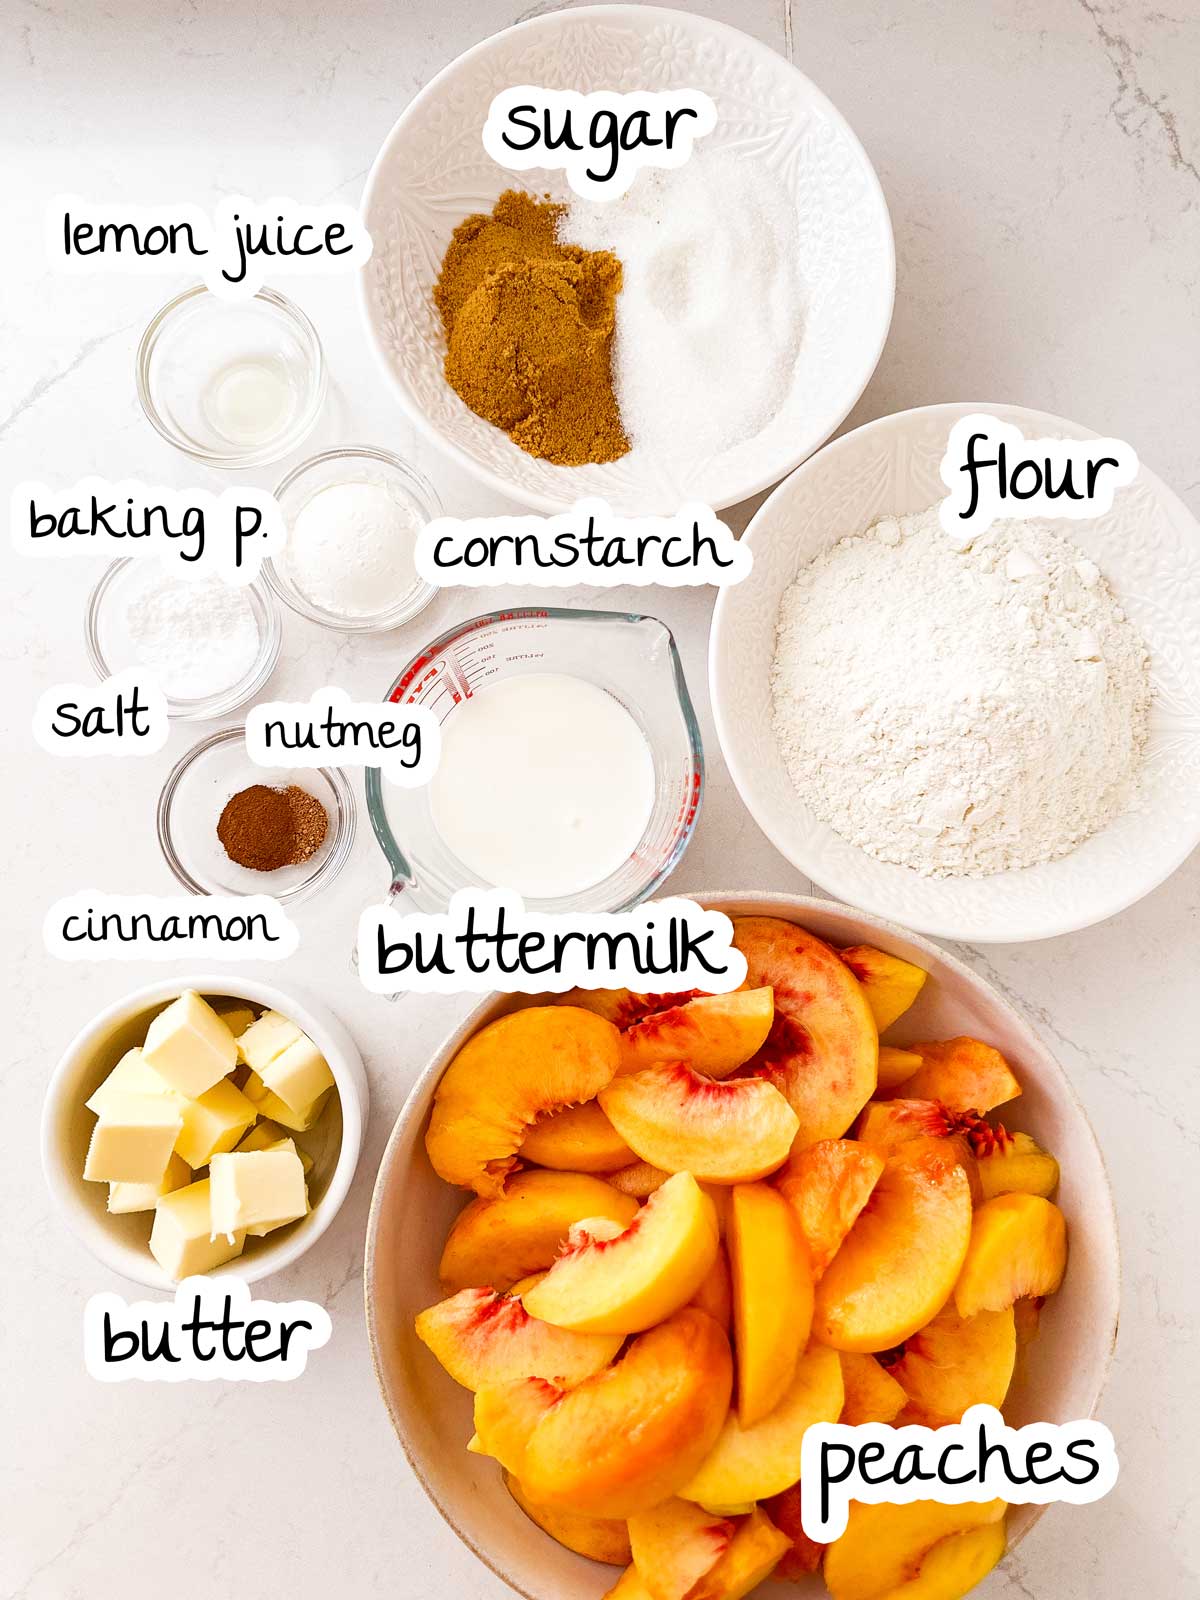 overhead view of ingredients for peach cobbler with text labels